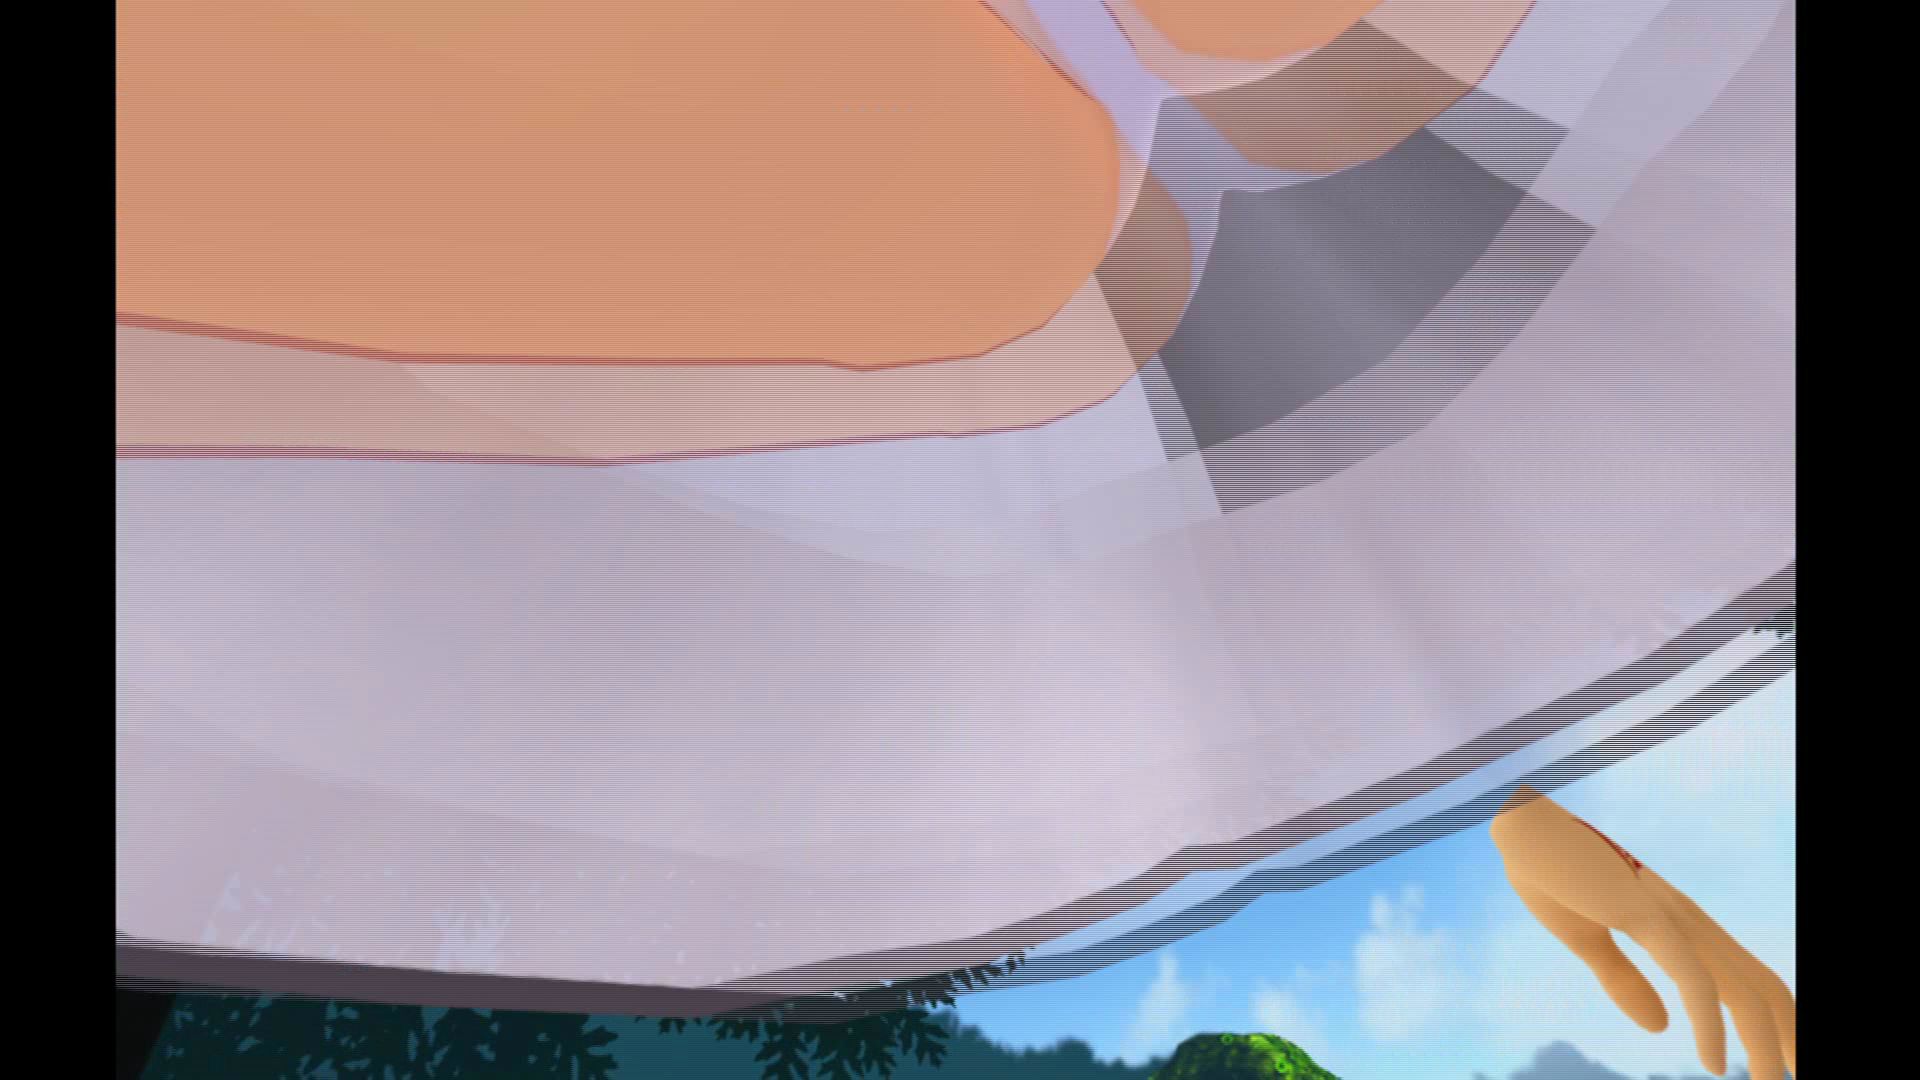 [Fate/Grand order VR] Maschsee underwear and breast! The underwear of the alto rear, too! 31